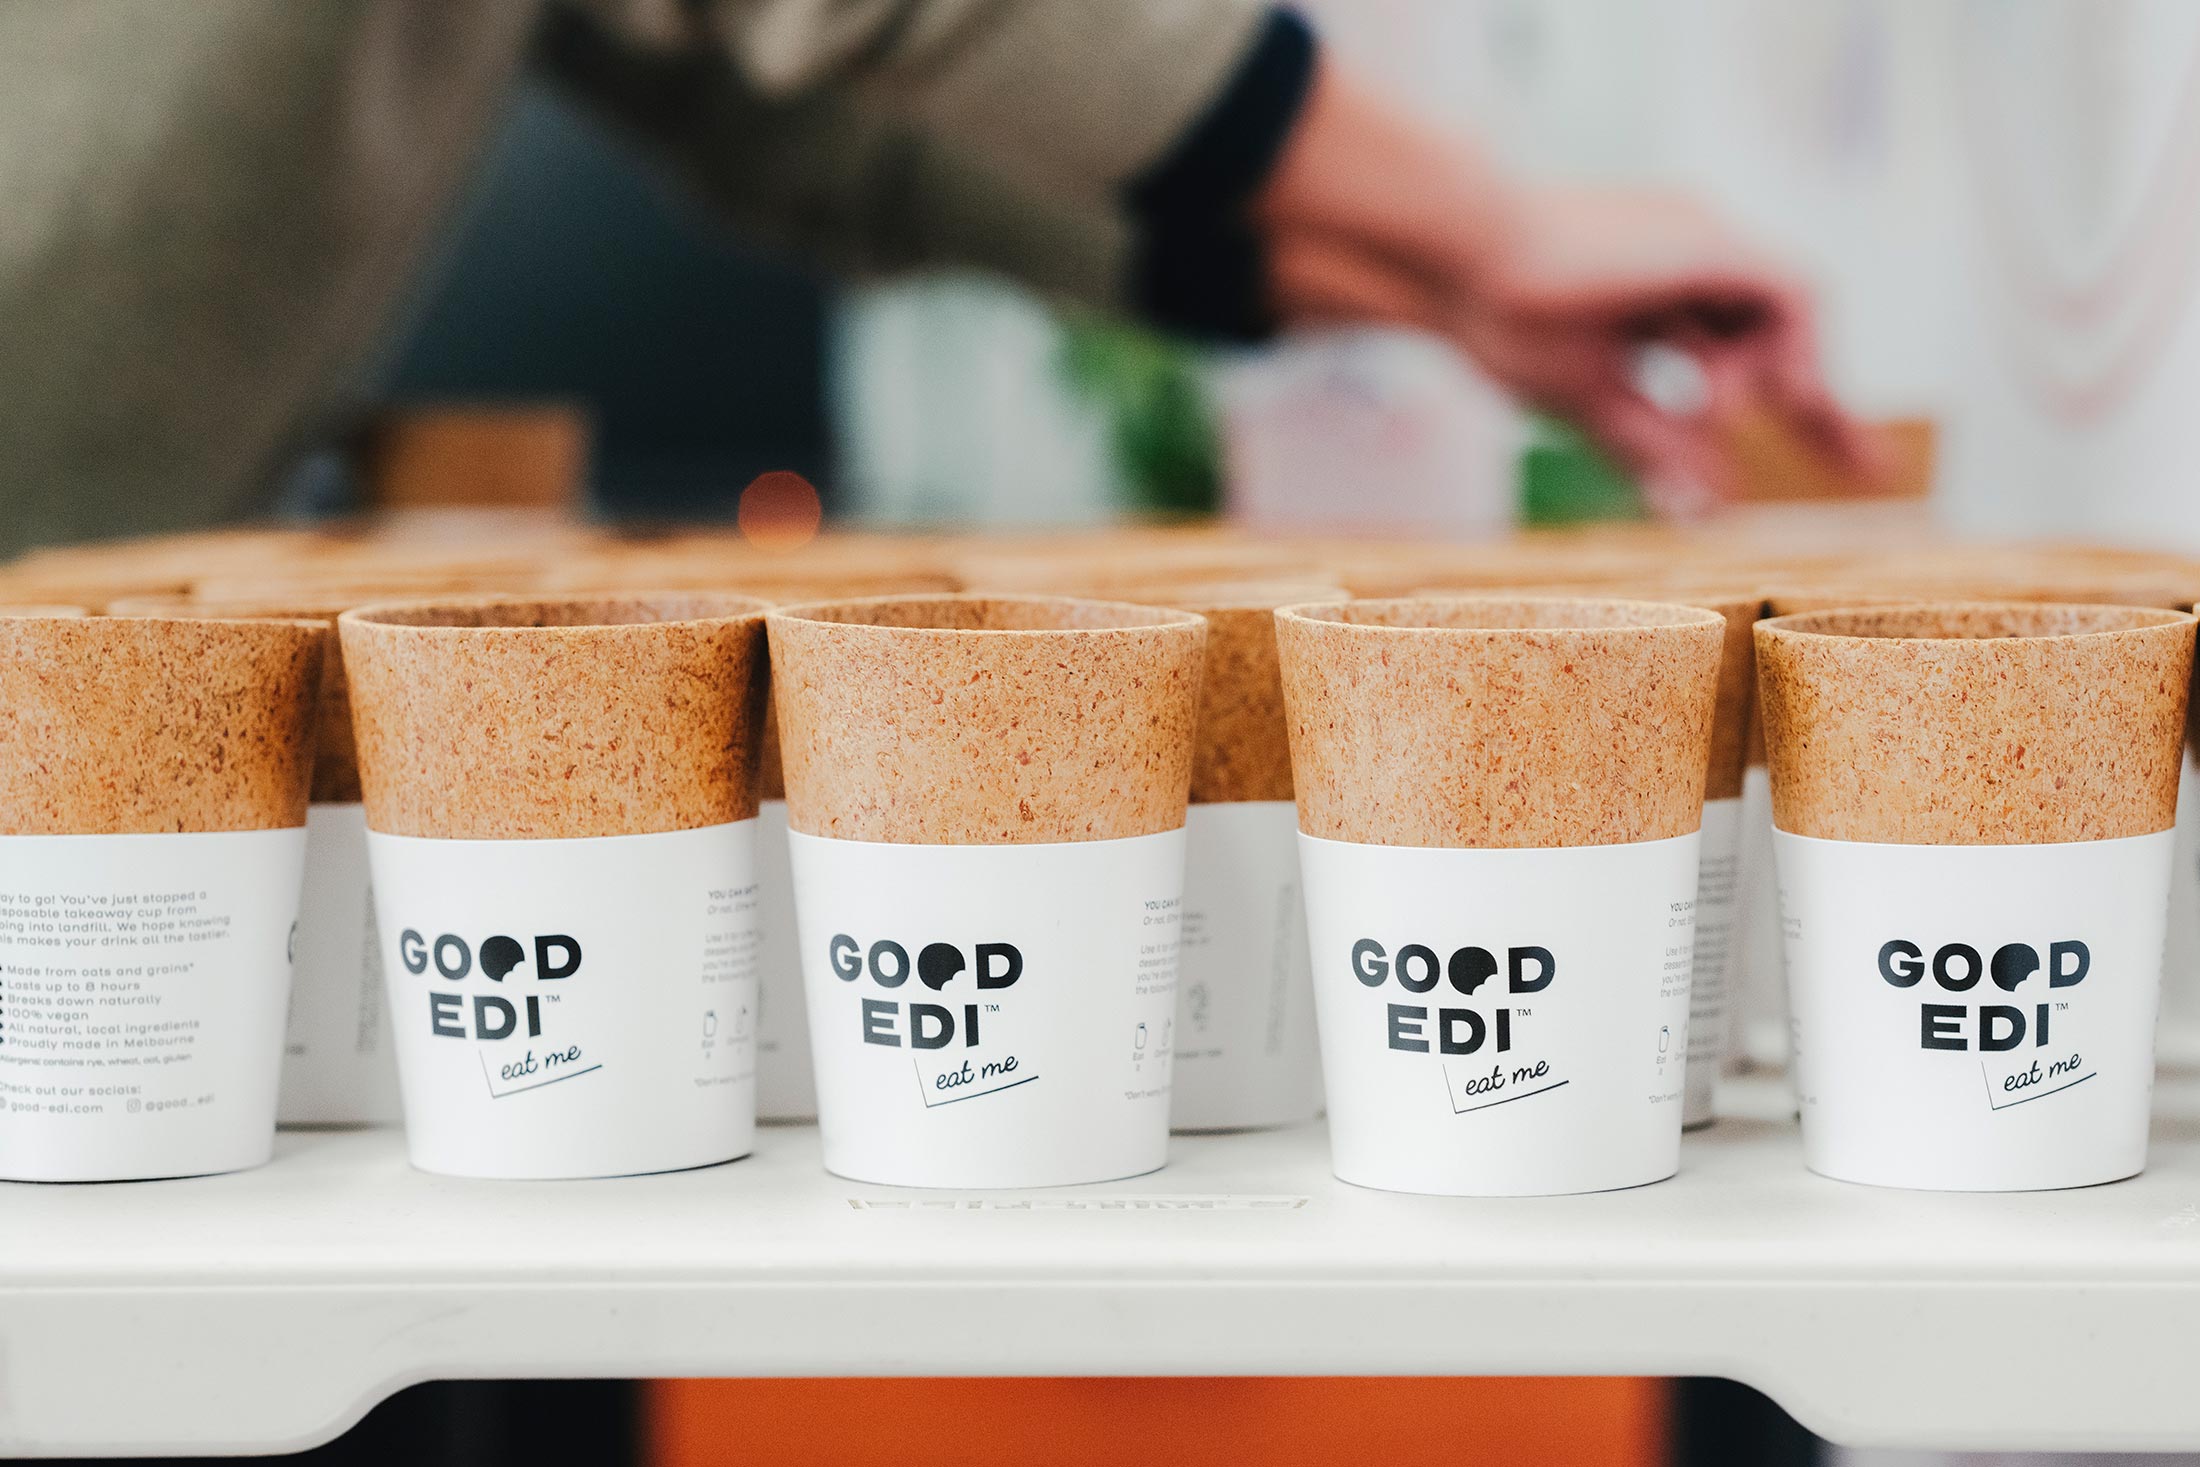 Edible Coffee Cups From Good-Edi Could Cut Environmental Waste